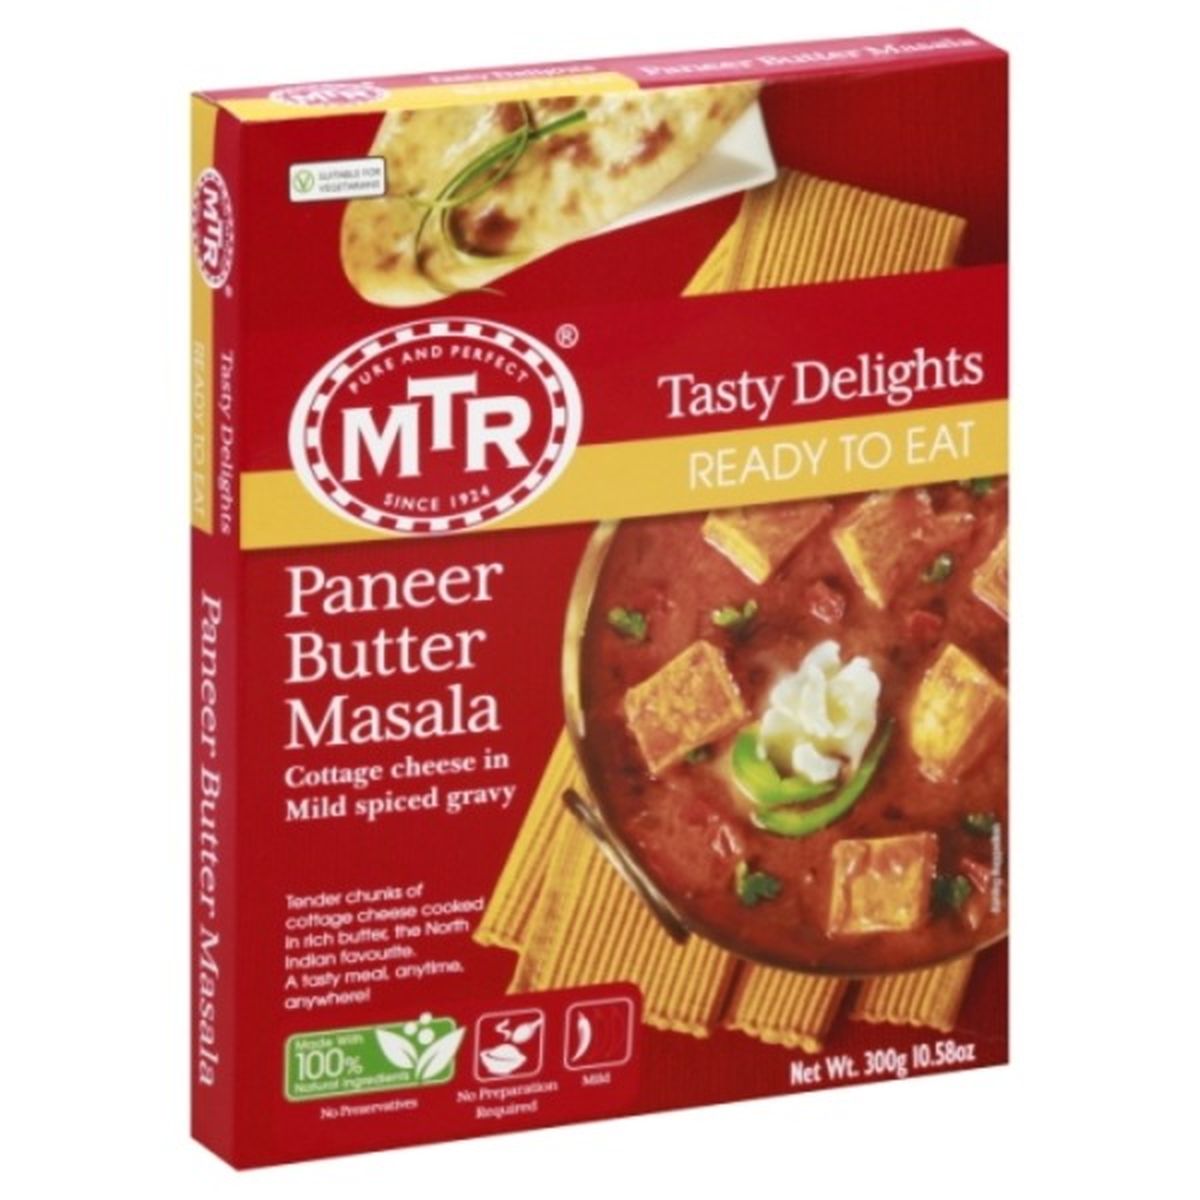 Calories in MTR Tasty Delights Paneer Butter Masala, Ready to Eat